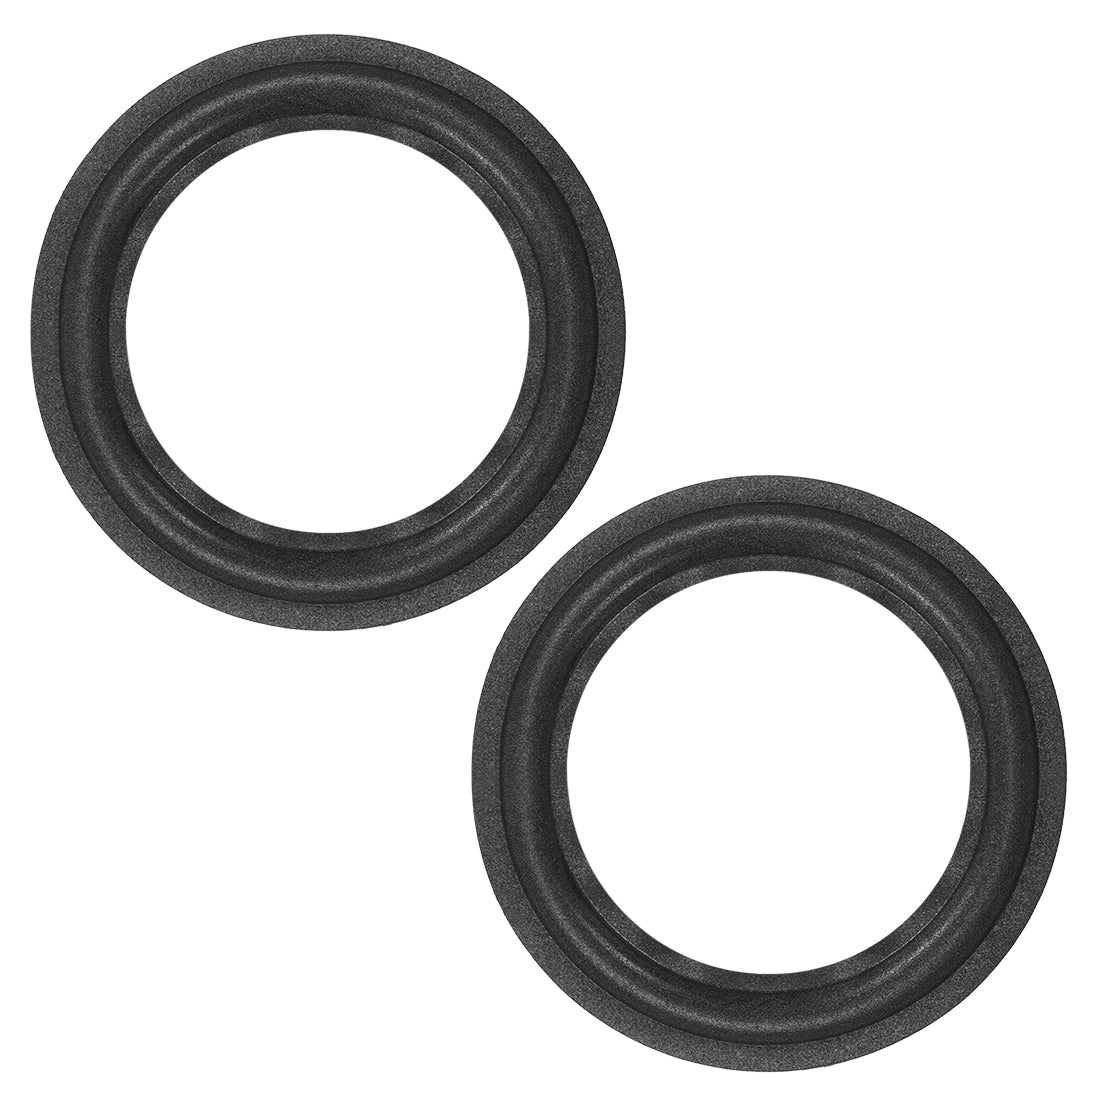 uxcell Uxcell 6 Inch Speaker Foam Edge Folding Ring  Horn Replacement Parts for Speaker Black 2pcs